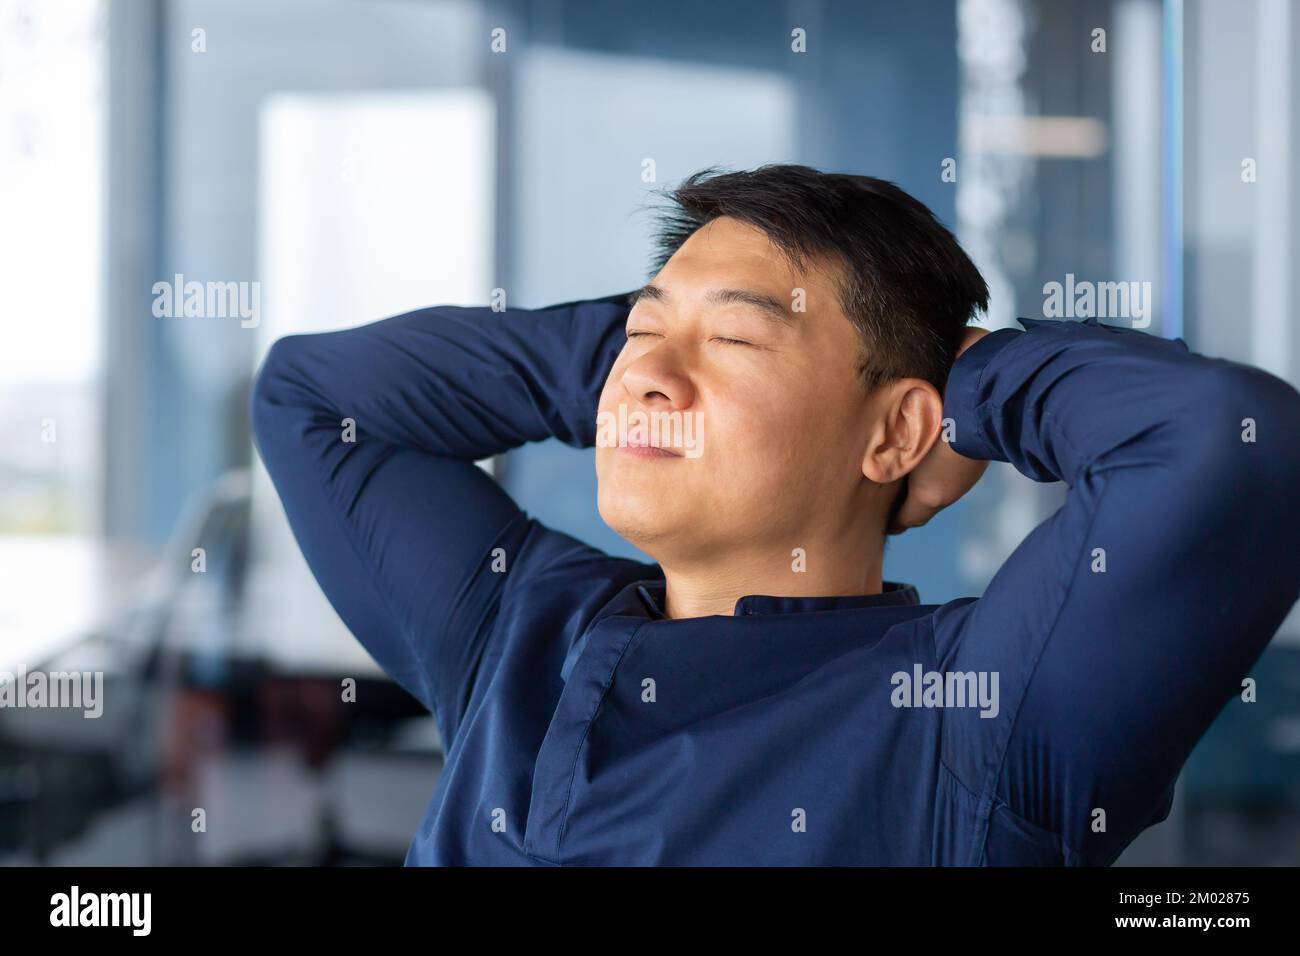 Asian businessman resting in office, man in shirt close-up with hands behind head dreams and visualizes desired plans and achievements. Stock Photo